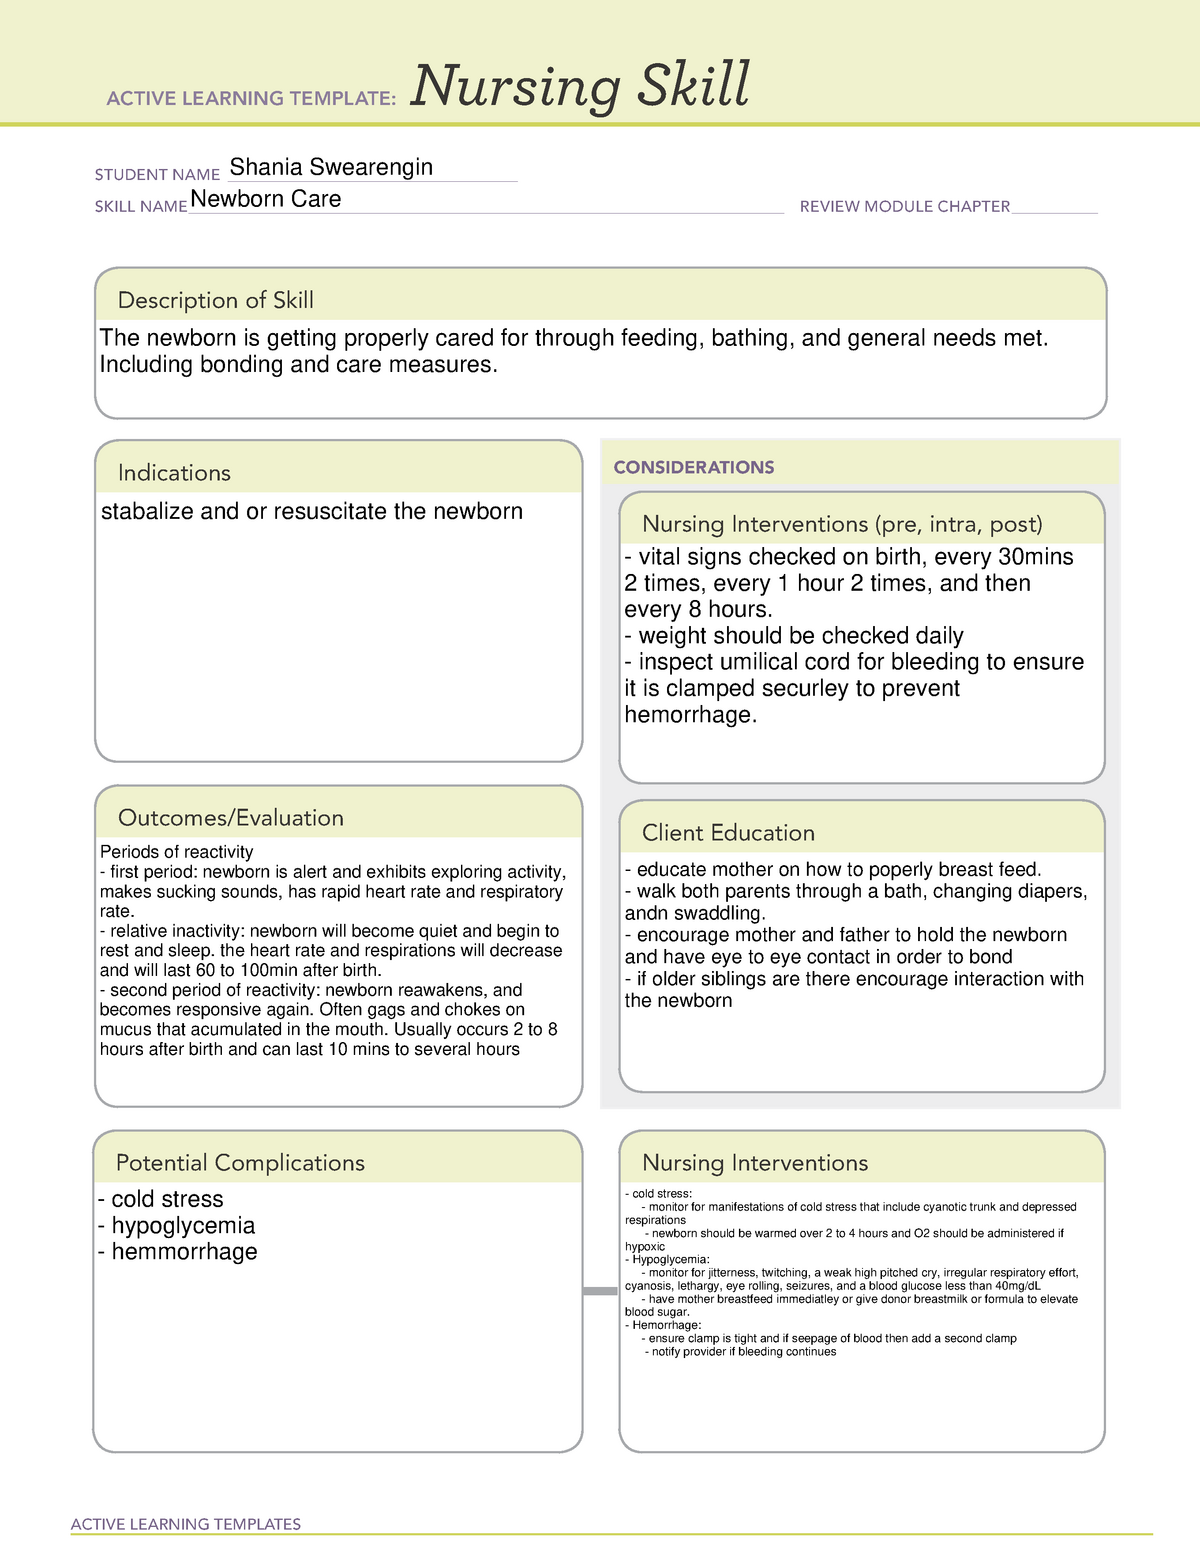 newborn-care-template-active-learning-templates-nursing-skill-student